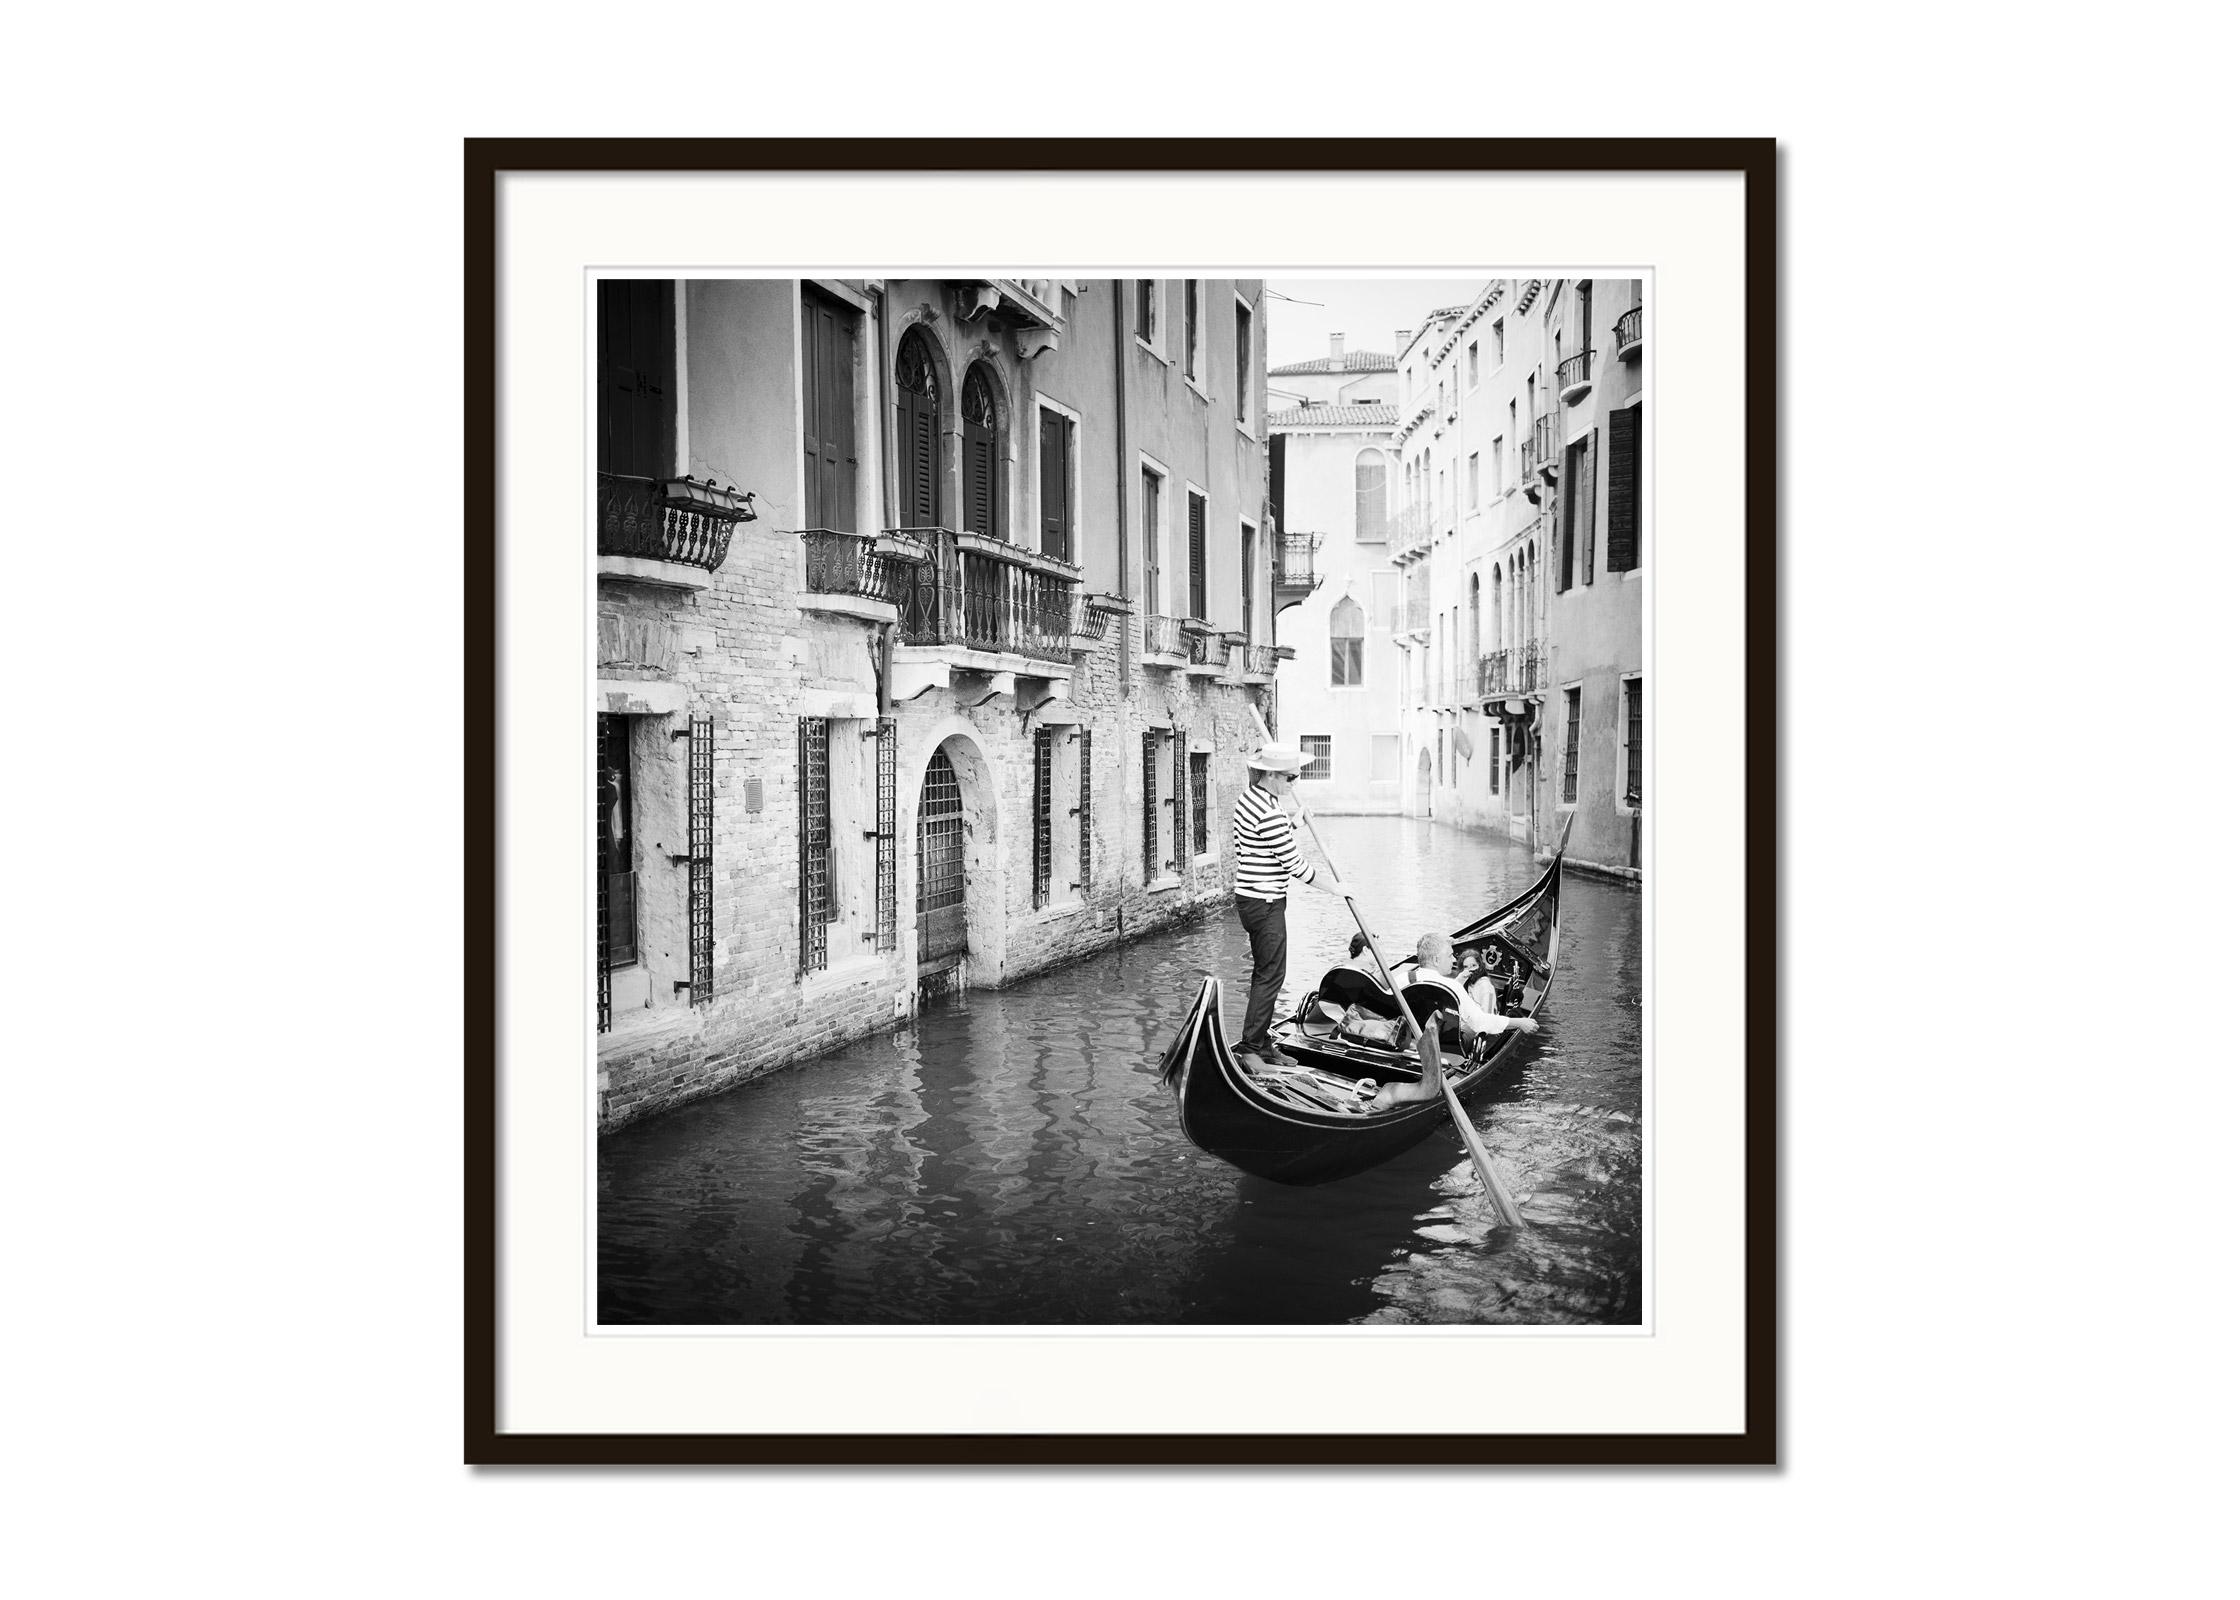 Gondoliere, Venice, Italy, fine art black and white photography, waterscapes - Gray Landscape Photograph by Gerald Berghammer